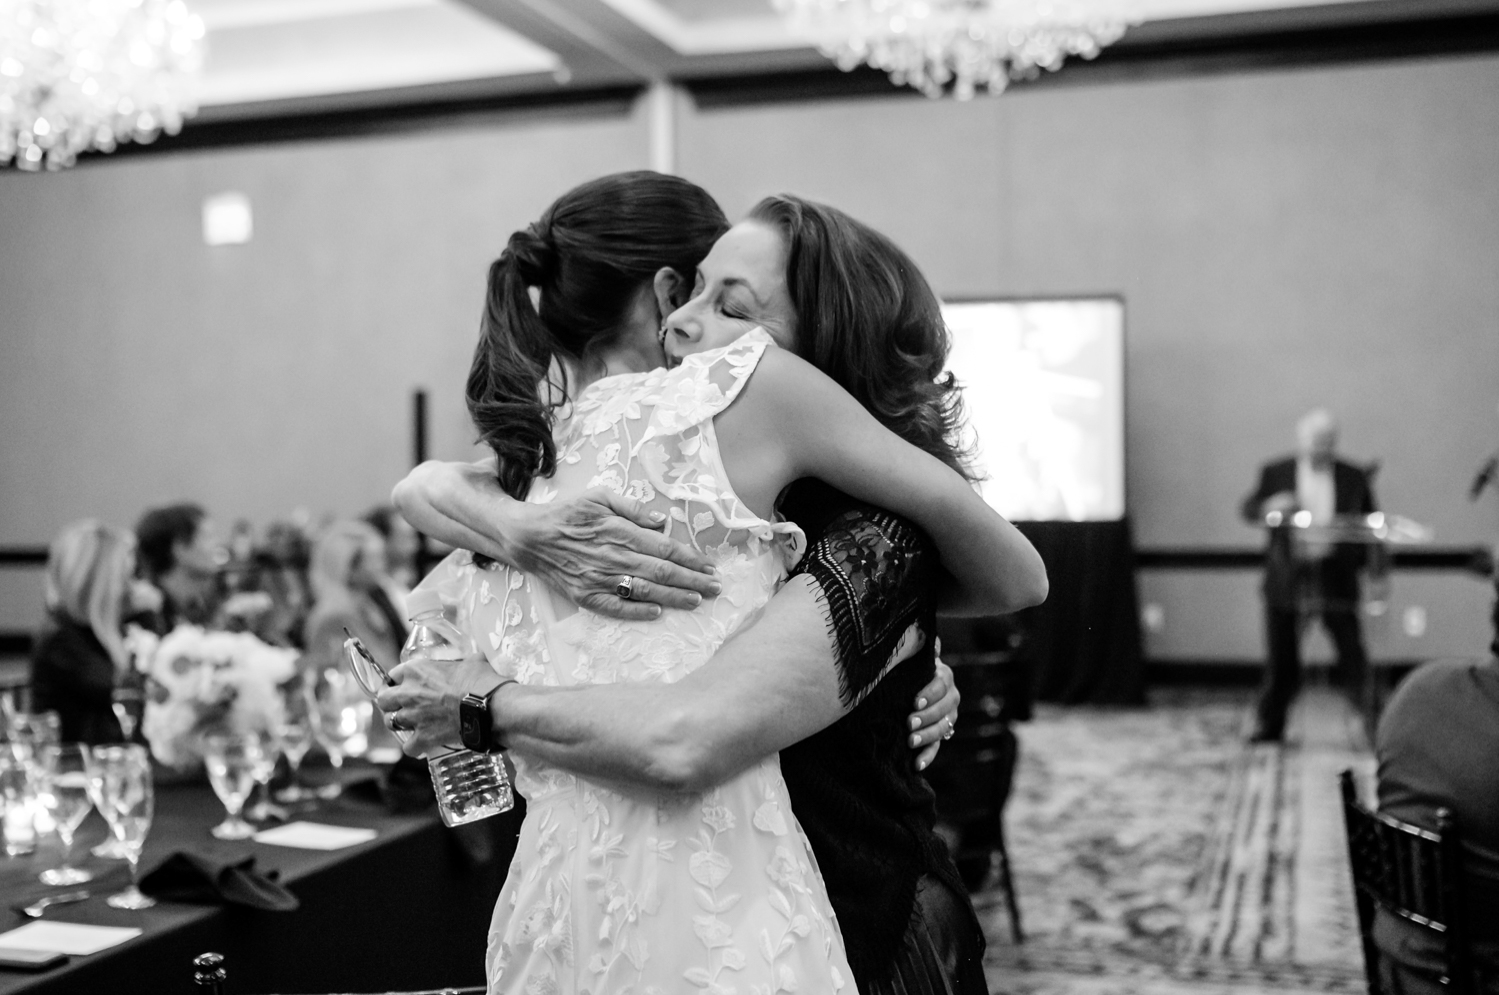 The bride hugs her mother at the rehearsal dinner